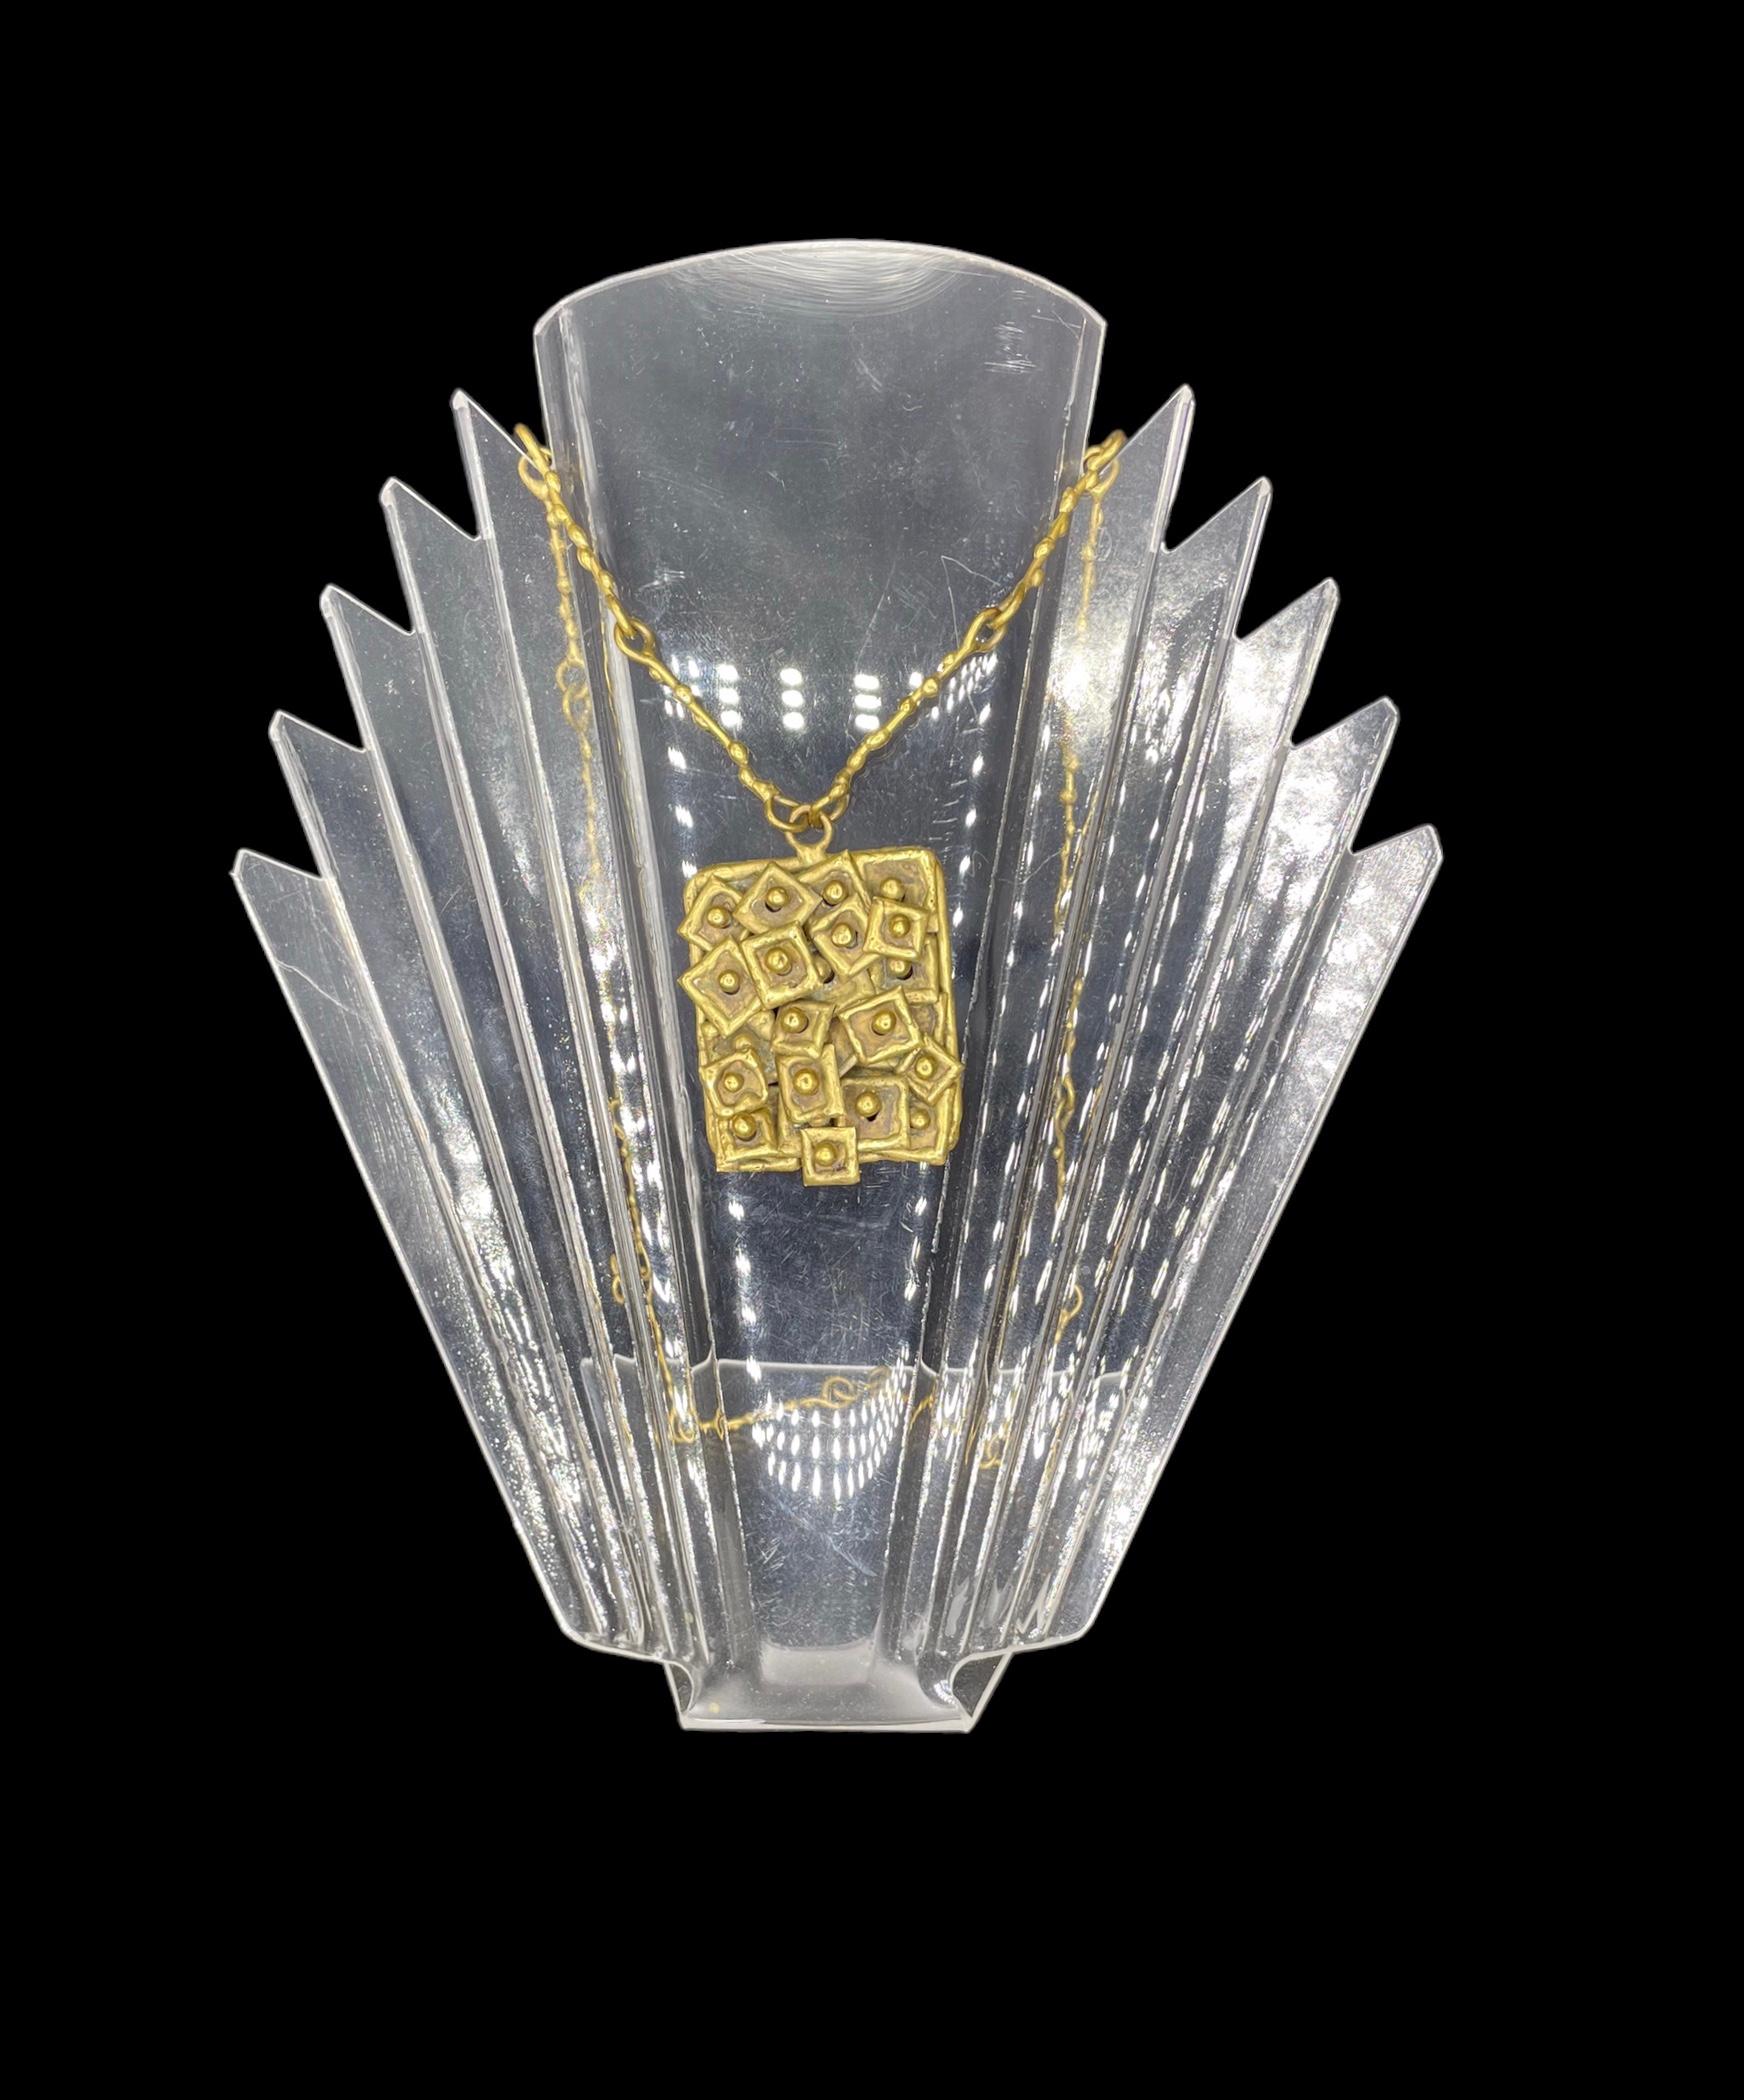 Designed by Pal Kepenyes (1926-2021) the brutalist necklace made in brass, with a natural aged patina.  It is decorated with overlapping tiles which gives the handmade piece a sense of movement. The original chain frequently seen on his pieces.
The